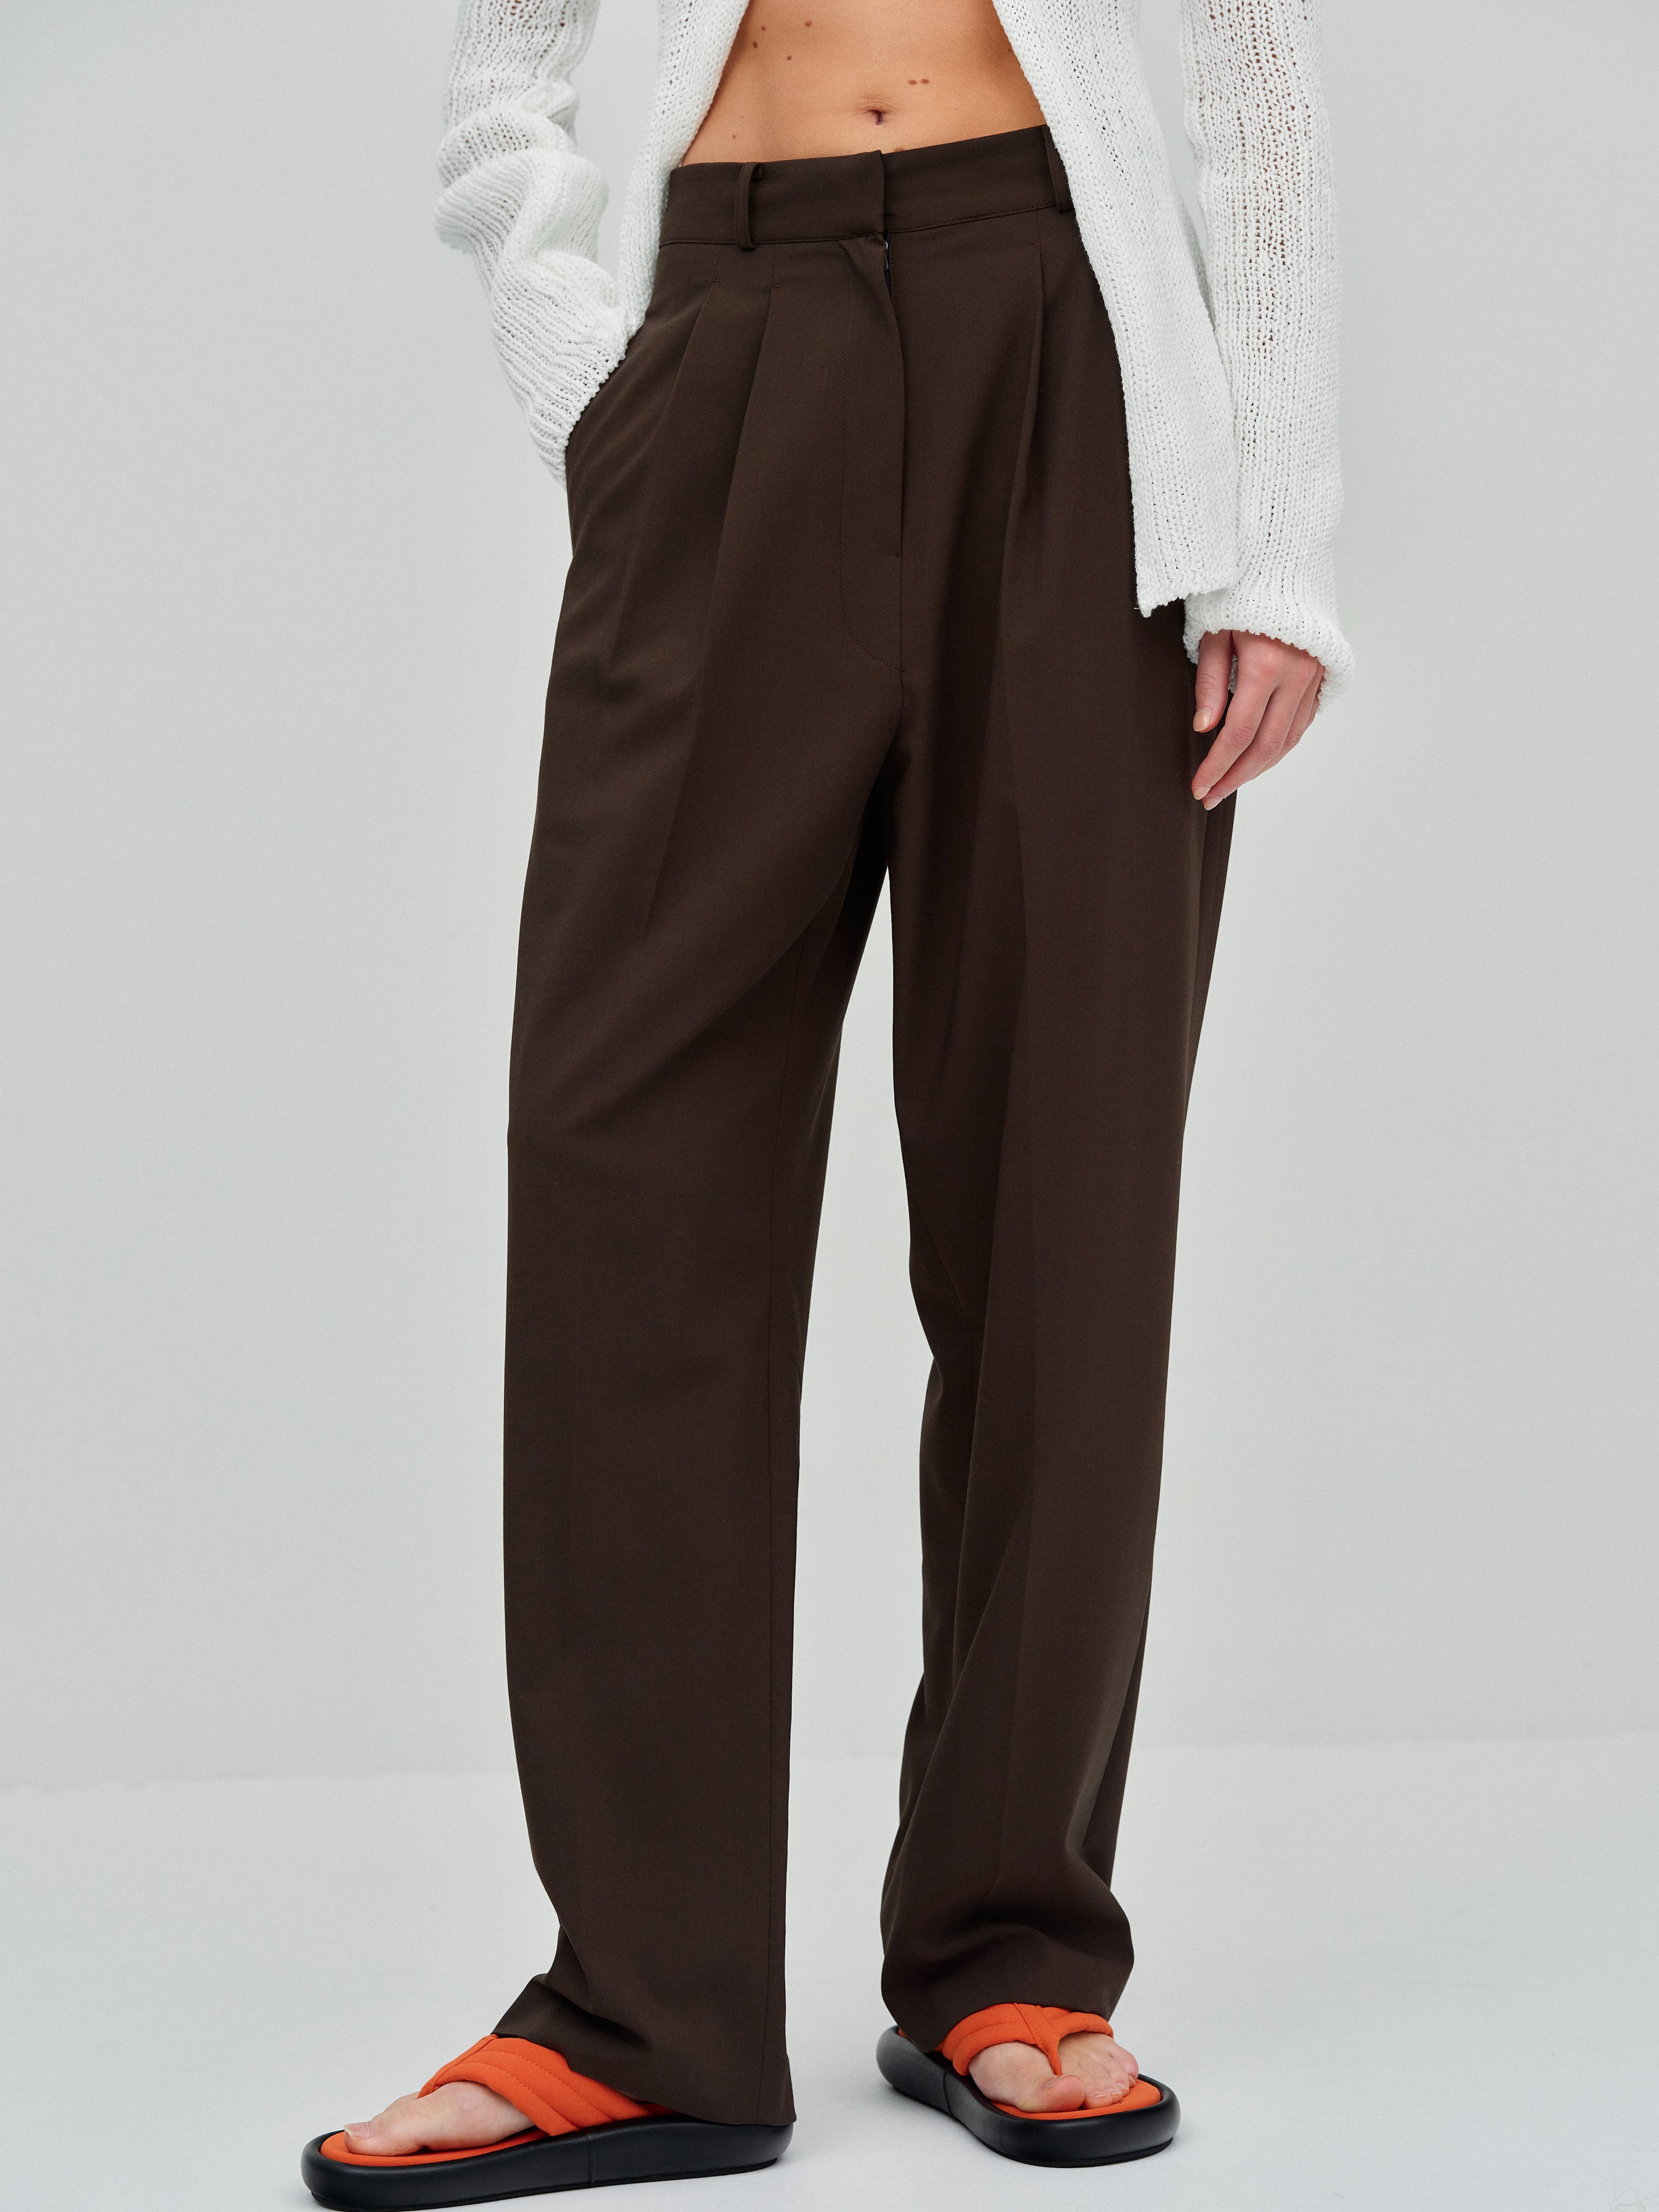 Pleated Suit Trousers, Chocolate – SourceUnknown